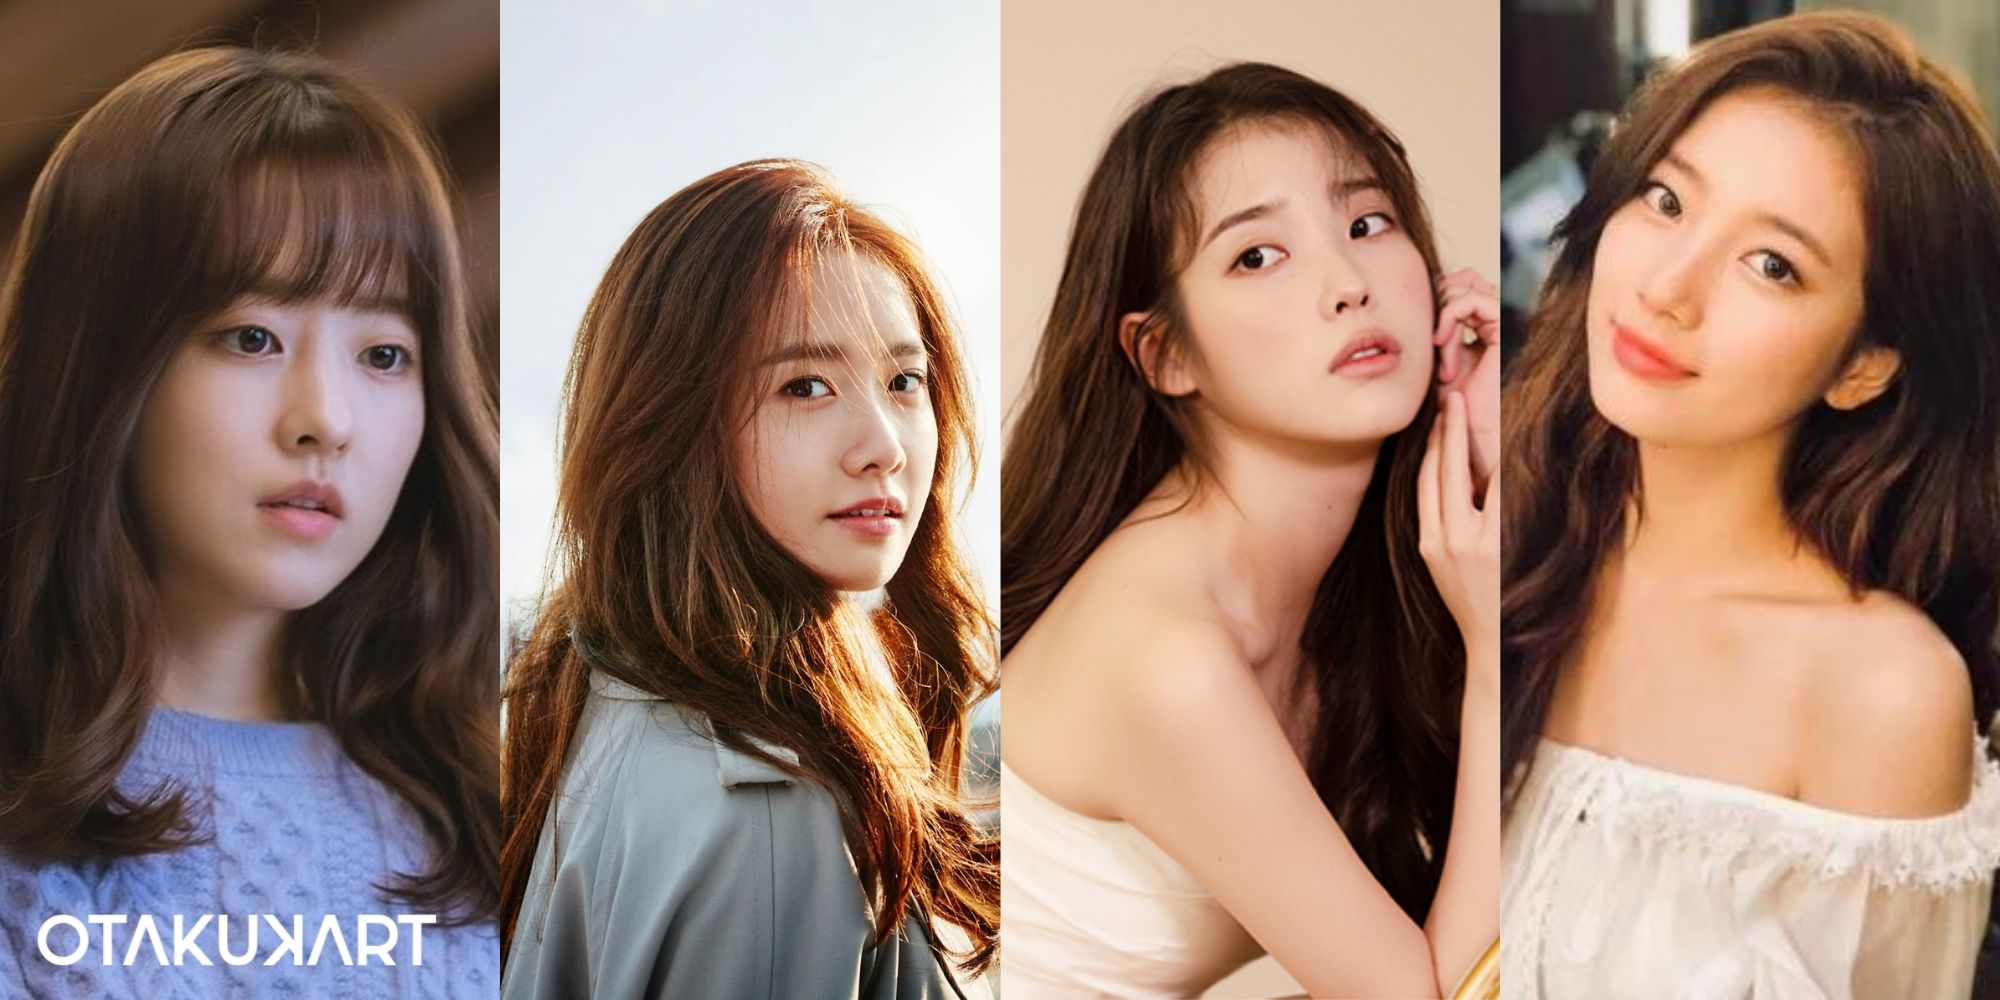 Best Korean Female Leads According To Fans